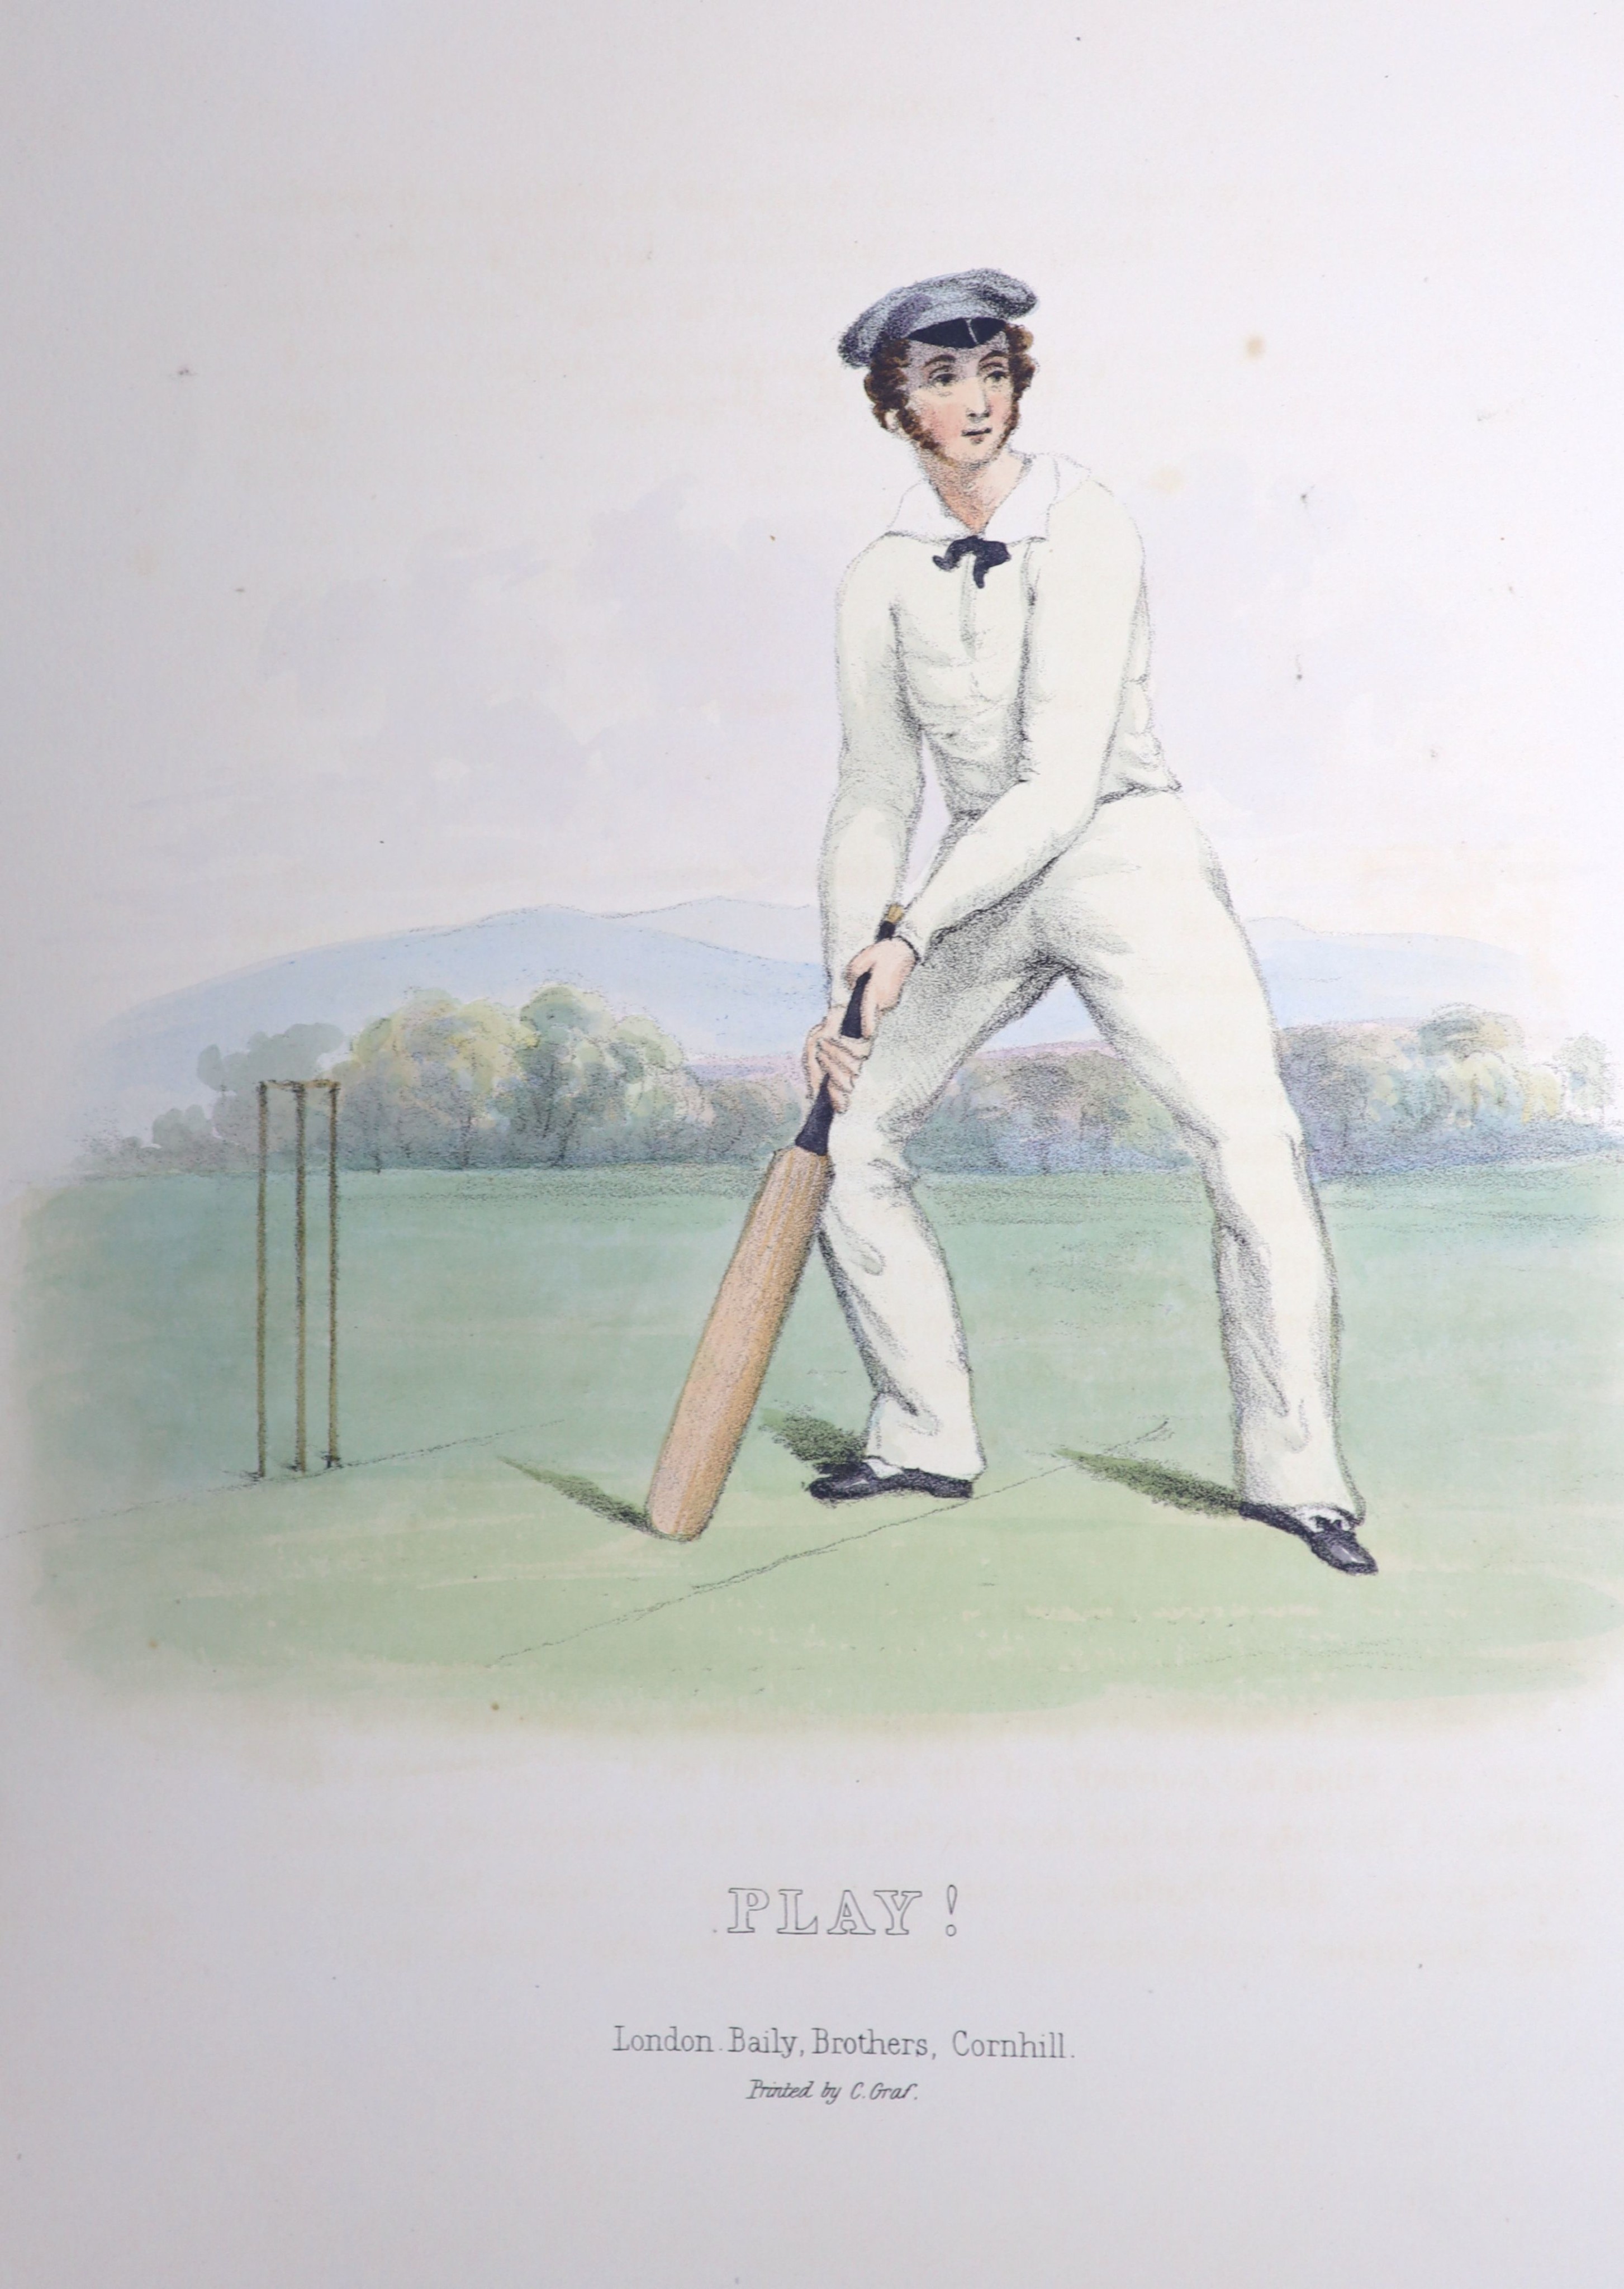 Wanostrocht, Nicholas- Felix on the Bat, 4to, original cloth, with hand-coloured litho frontis, 6 coloured plates and 3 plain plates, bookplate of Hugh Cecil Earl of Lonsdale, Baily Brothers, London, 1845